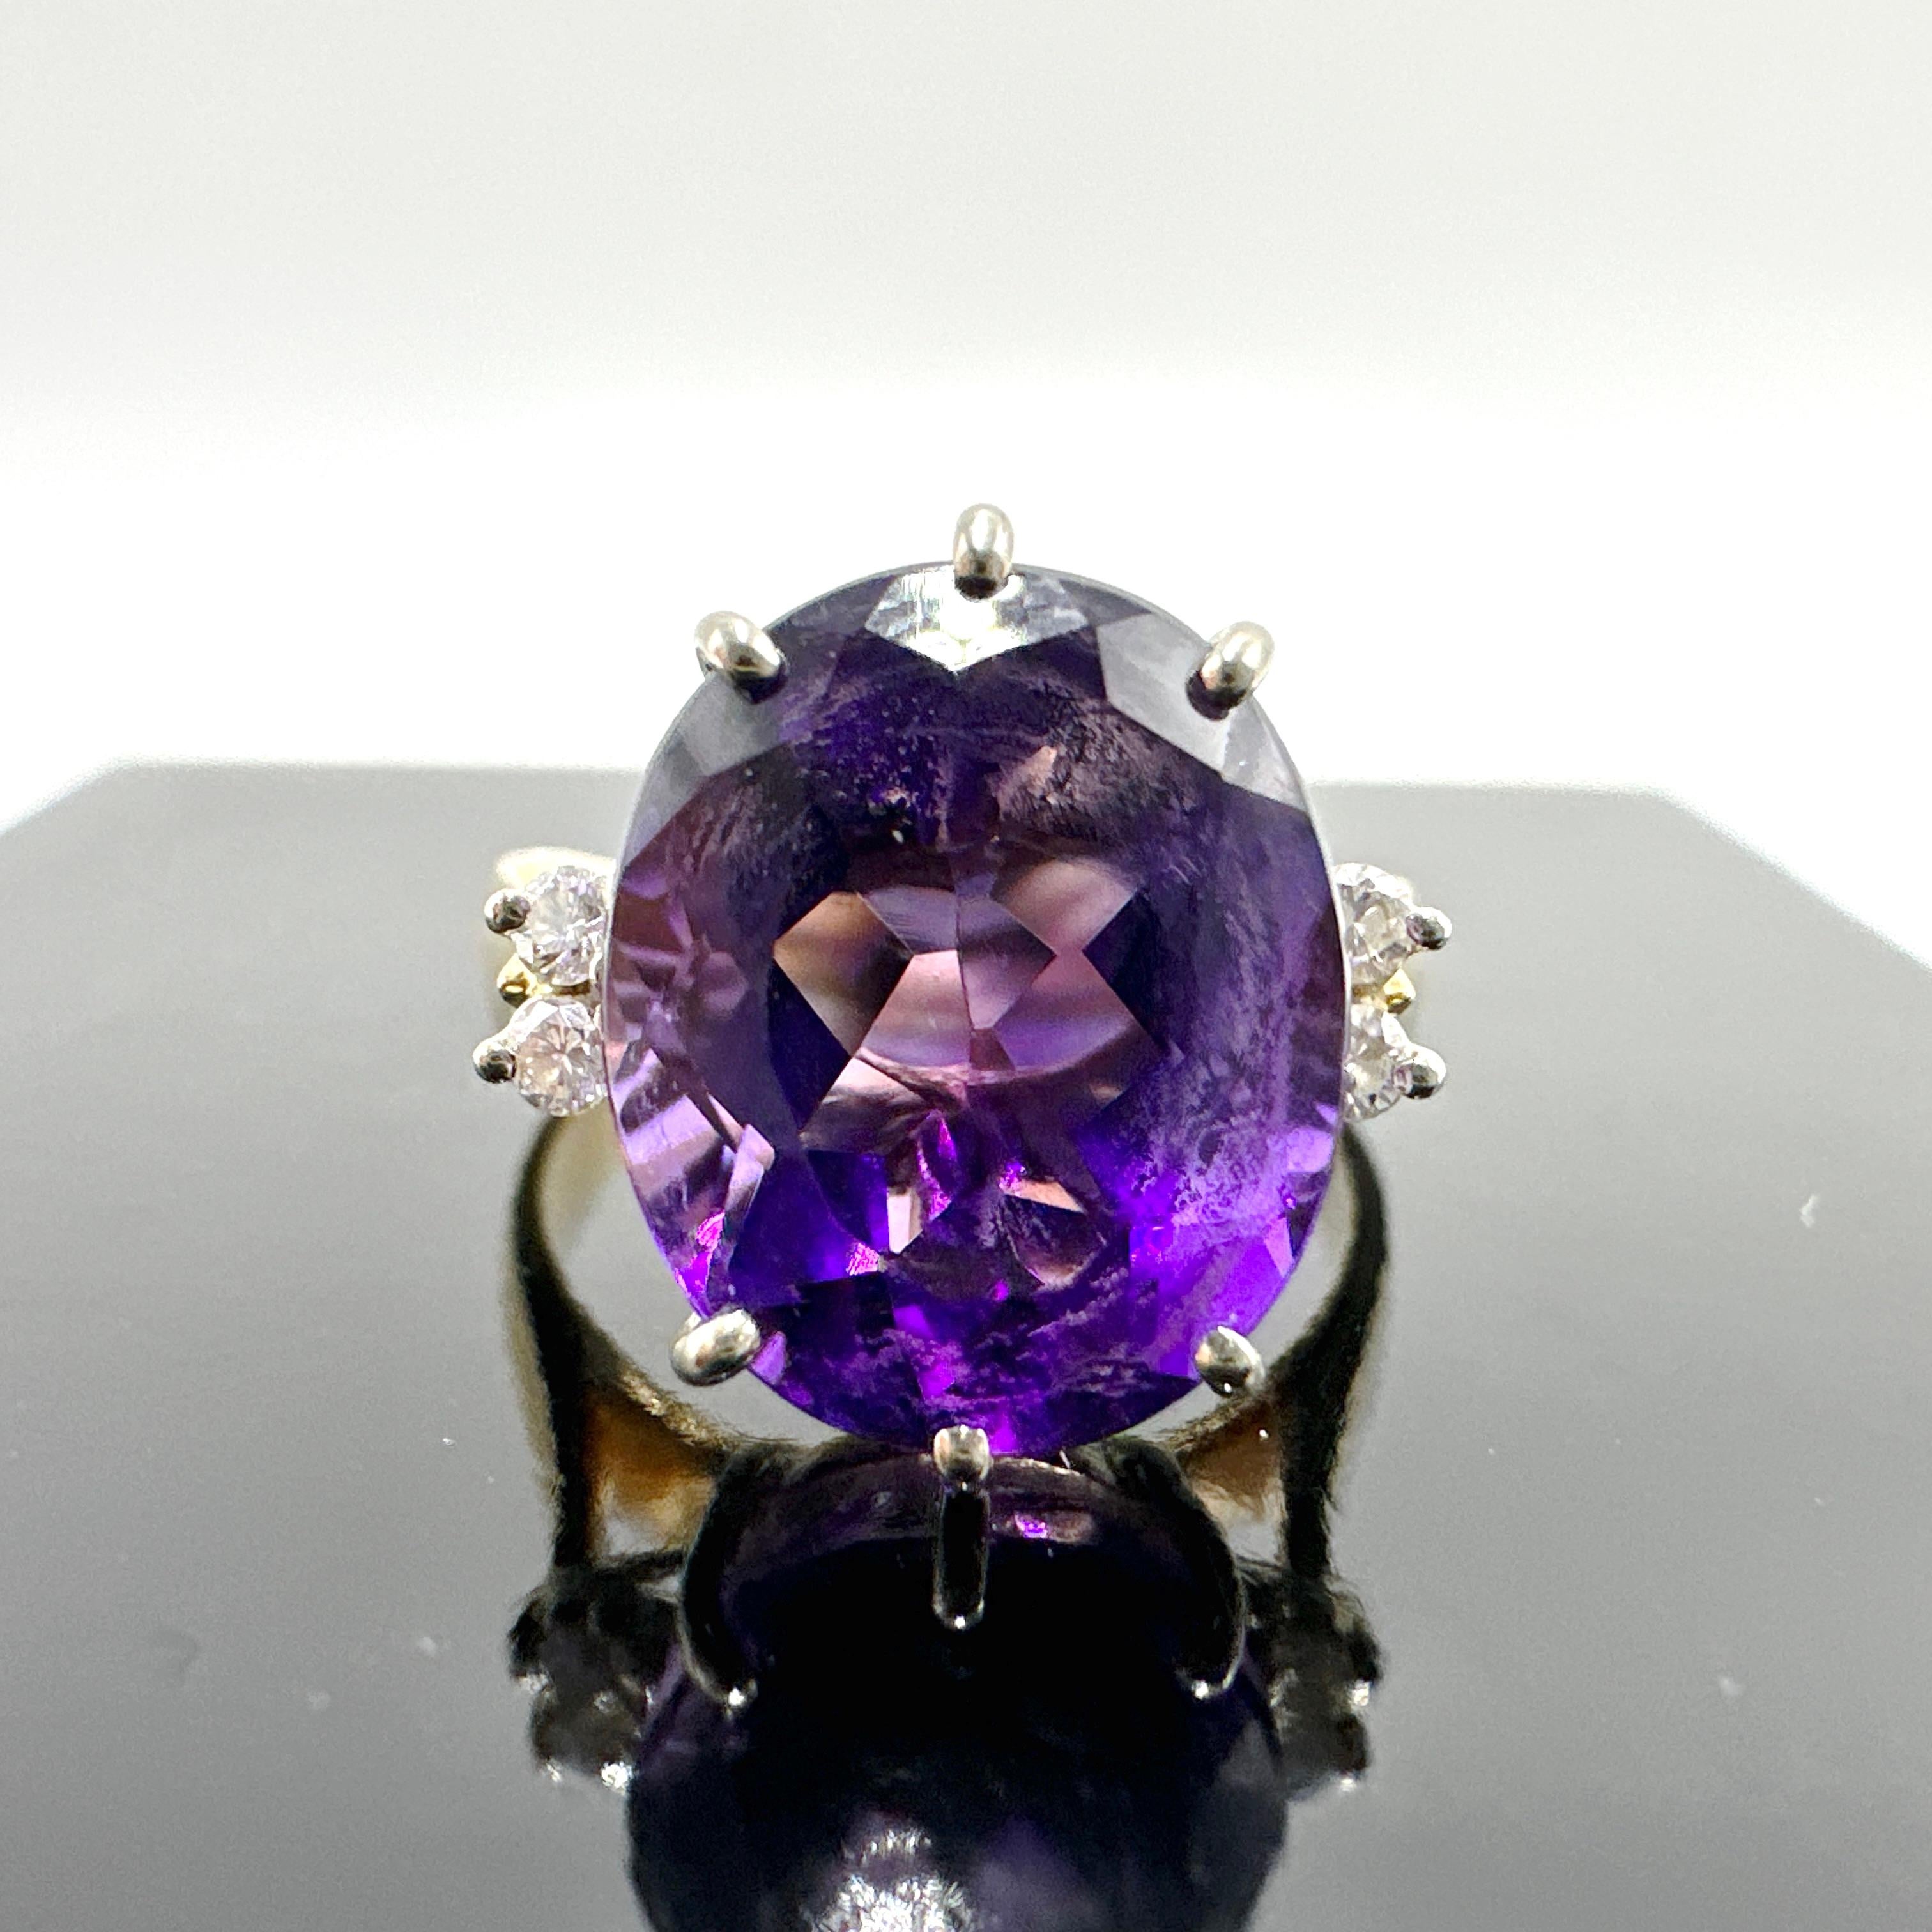 Here is a beautiful 14k Yellow Gold Amethyst and Natural Diamond Cocktail Ring.

This ring features a 4.79ct oval cut amethyst quartz measuring 12.00mm x 10.00mm x 7.15mm. Amethyst is very lightly included with medium tone, purple hue, moderately